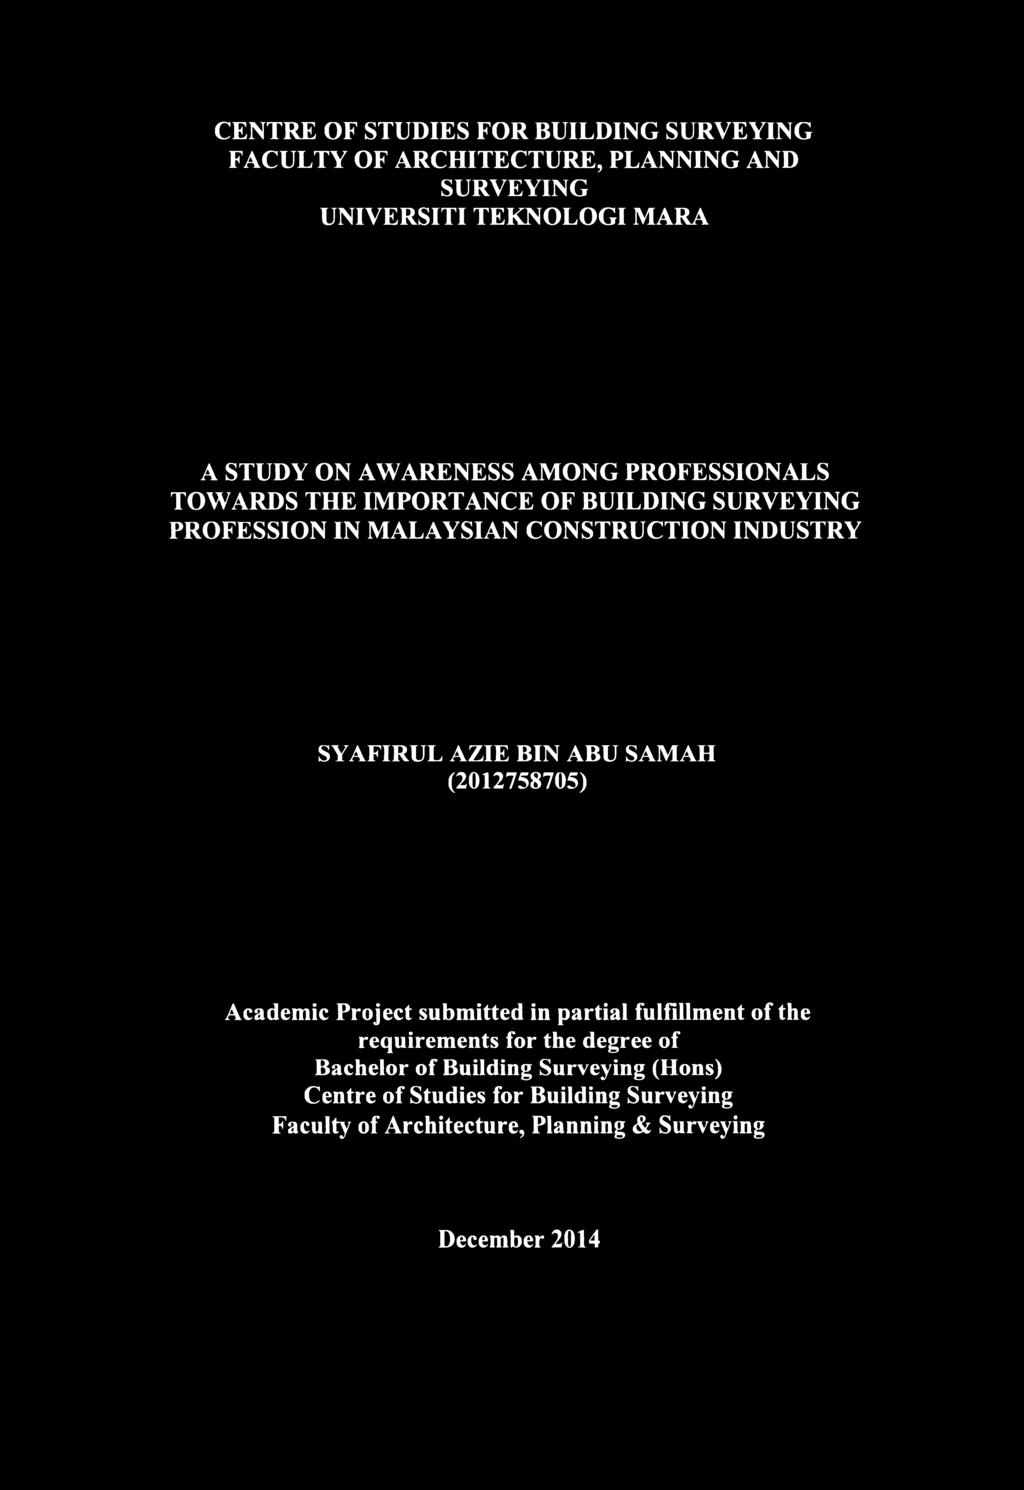 fulfillment of the requirements for the degree of Bachelor of Building Surveying